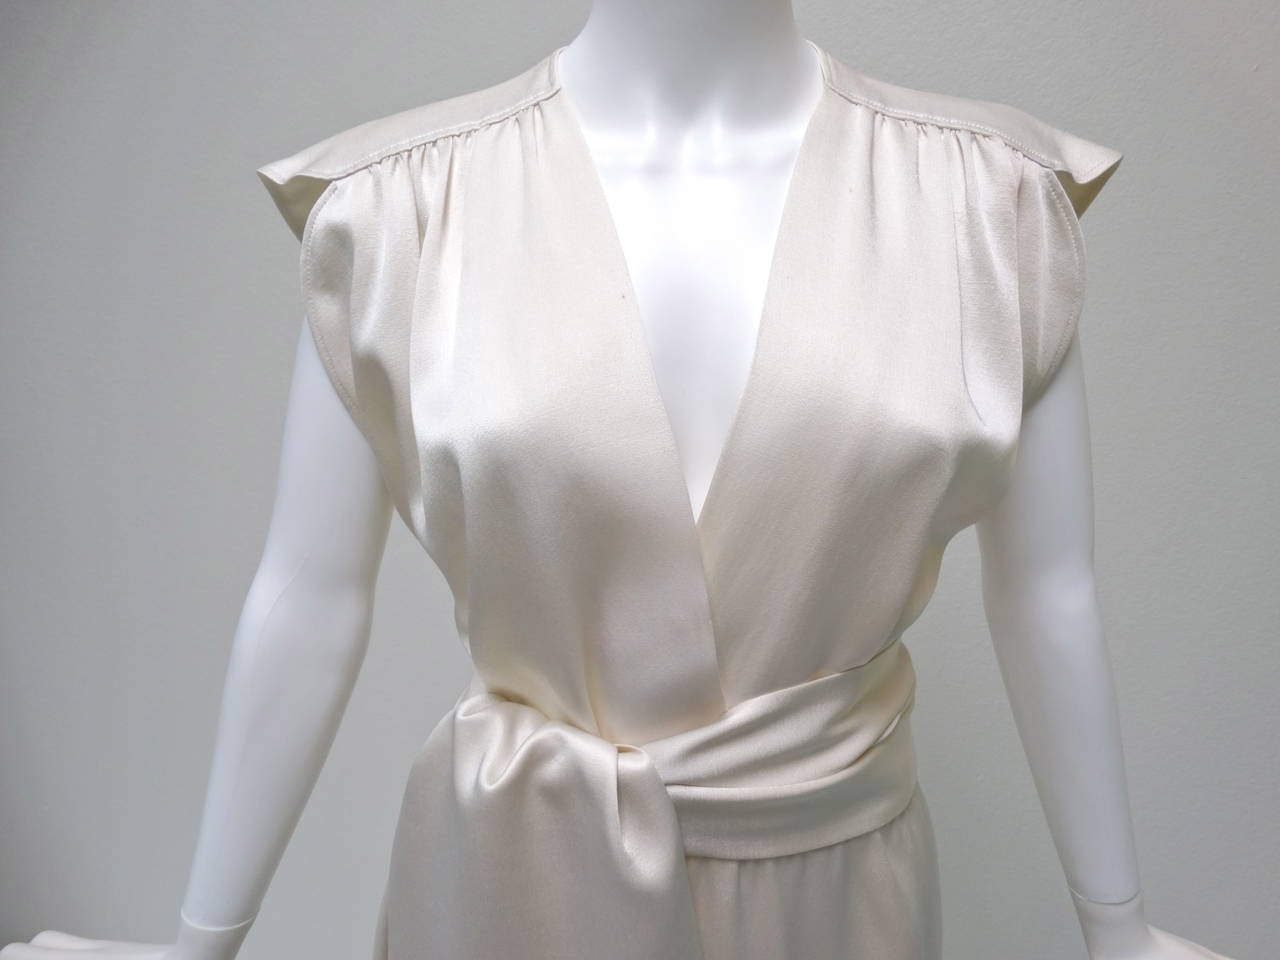 This is a beautiful Silk Saint Laurent for Yves Saint Laurent circa 1970's off white gown with a v-neck neckline and a detachable sash belt. This dress has a beautiful cut, great cap sleeves and a slight train on the back bottom hem. Marked size 40.